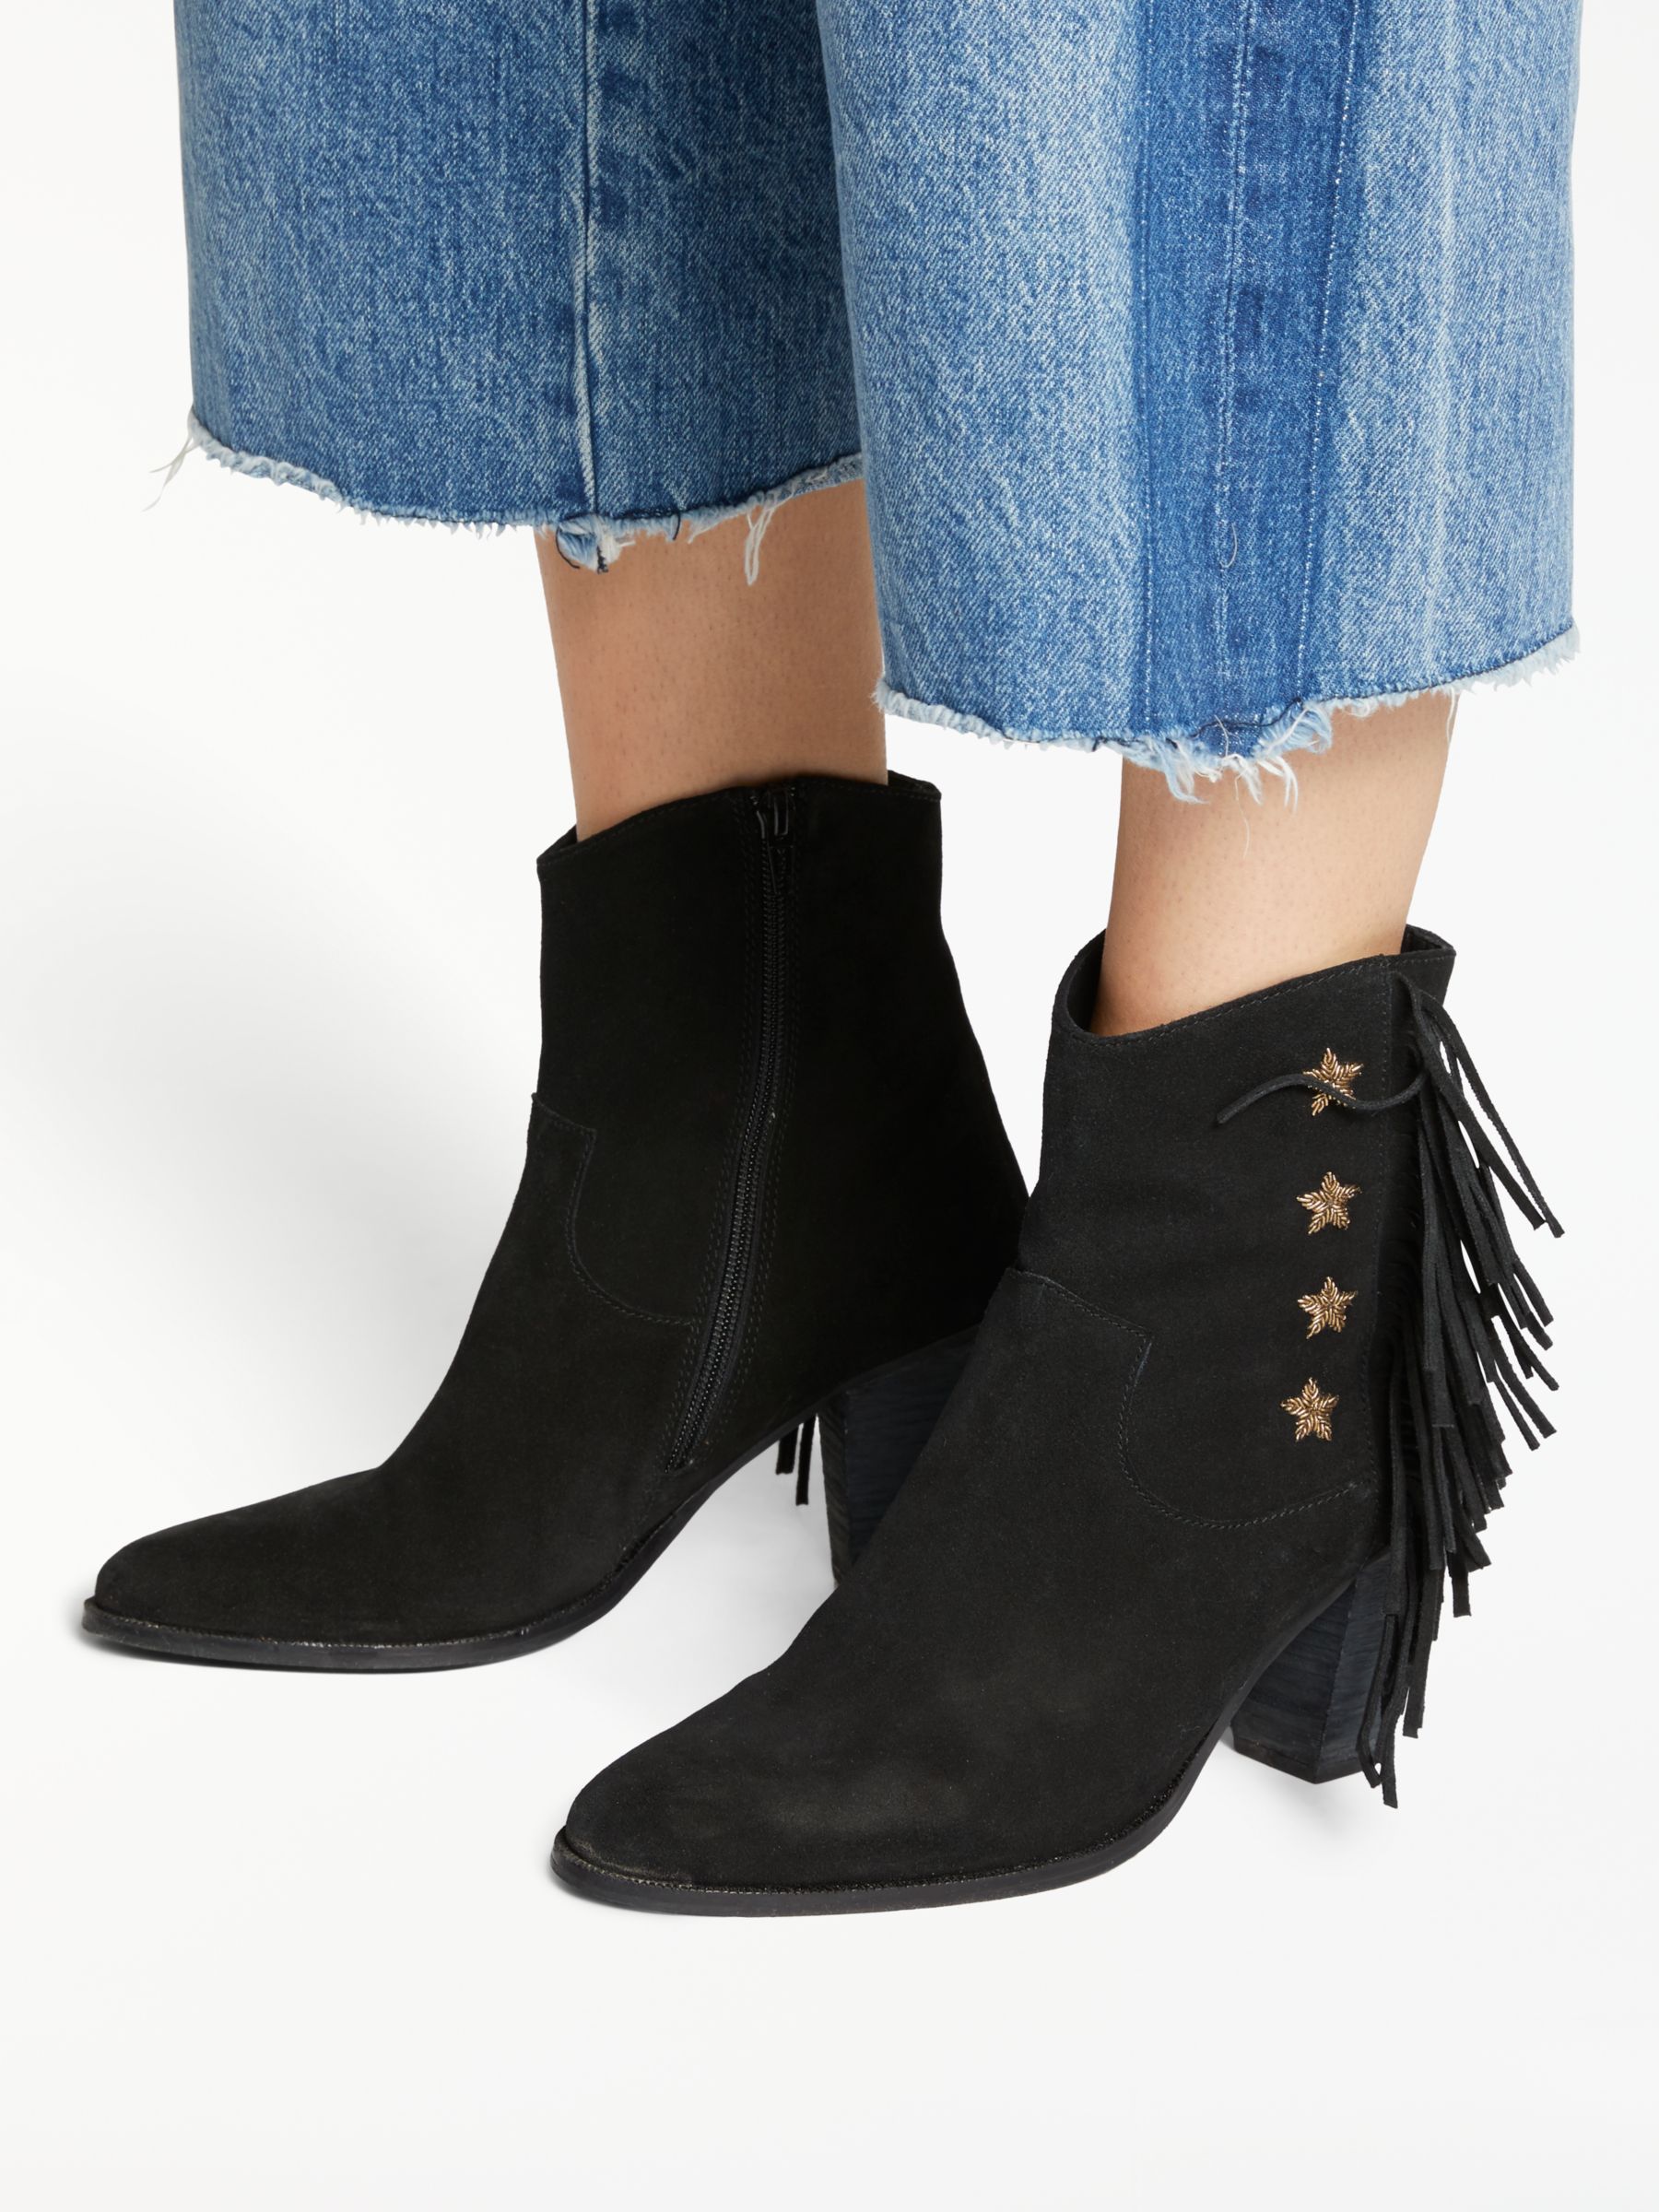 AND/OR Taryn Star Fringed Ankle Boots, Black Suede at John Lewis & Partners